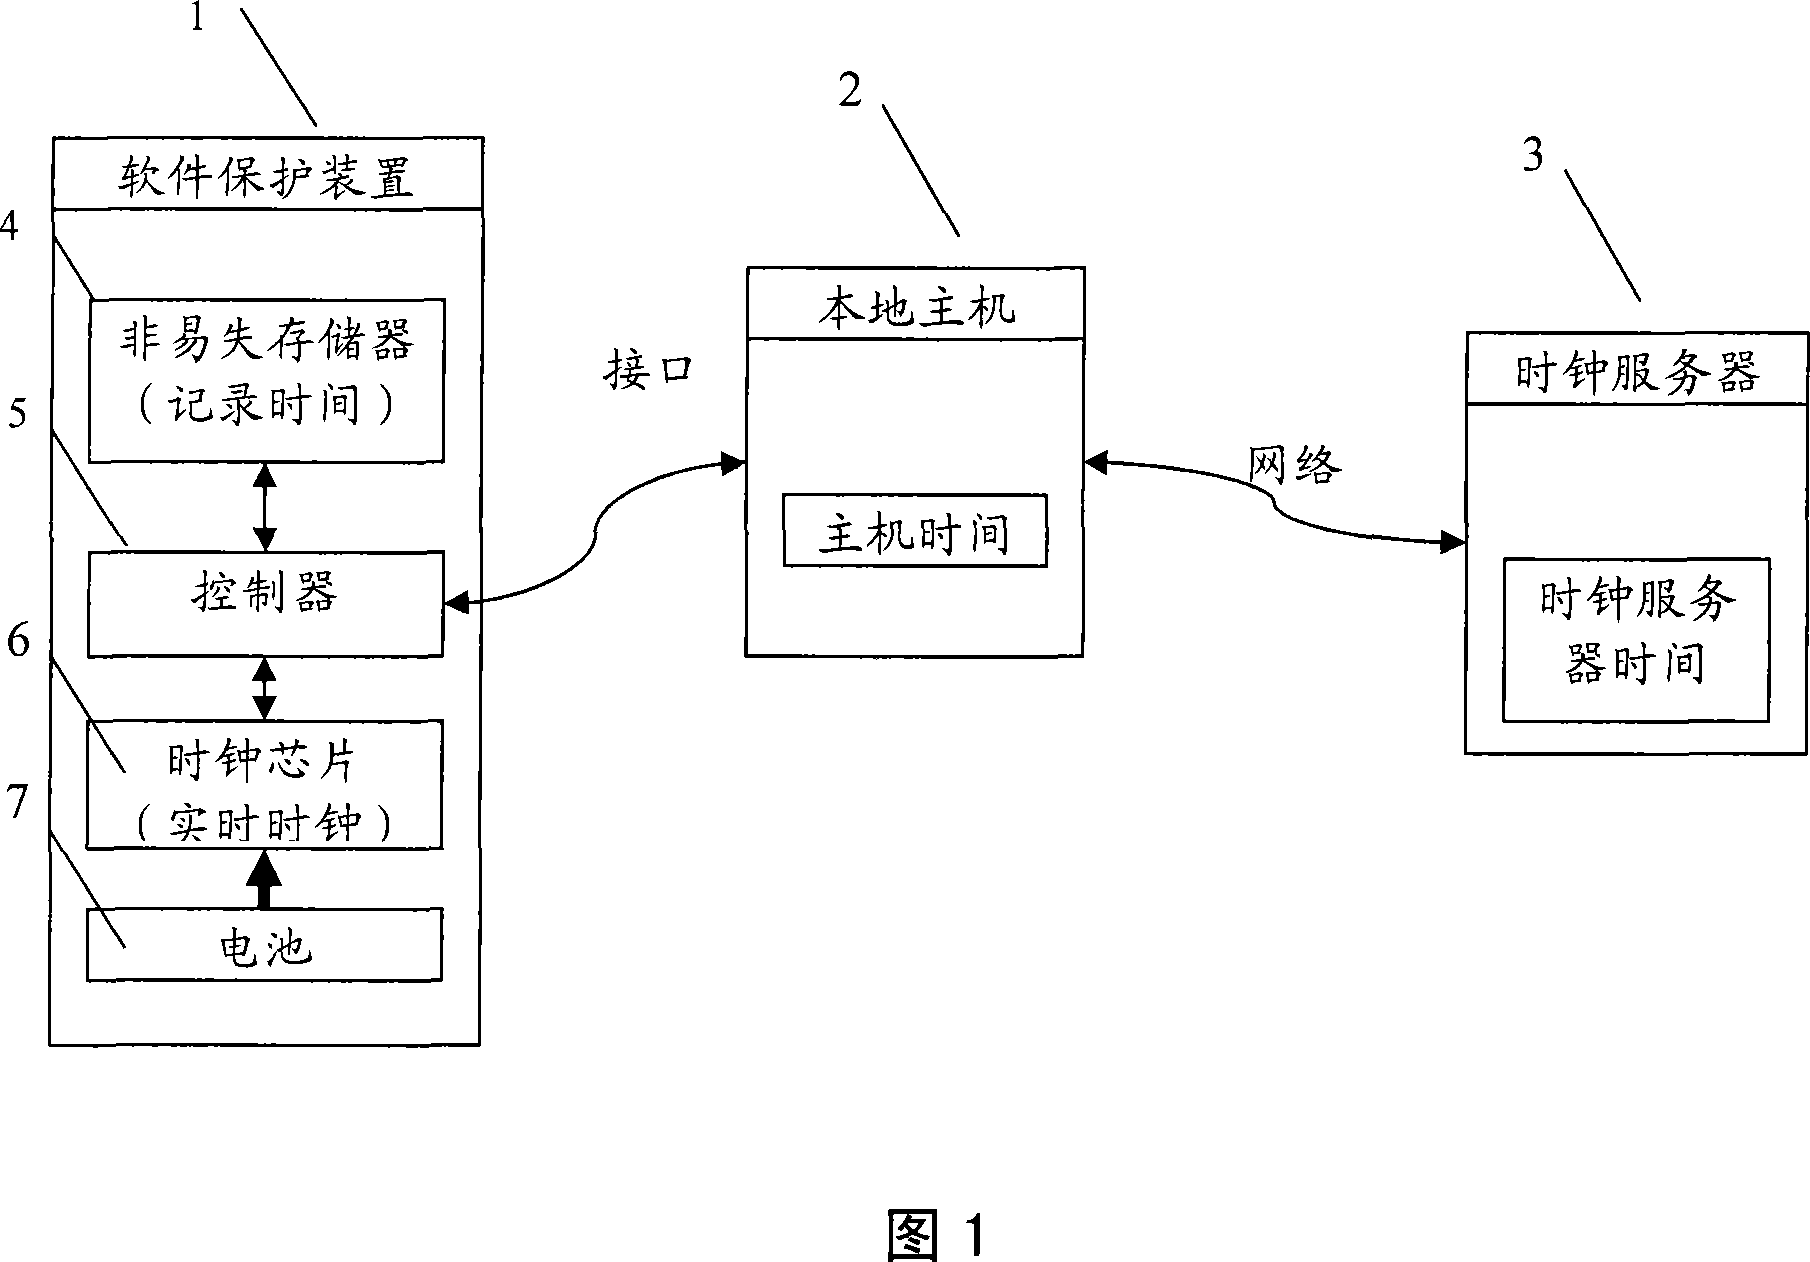 Remote calibration method of real time clock in software protection device